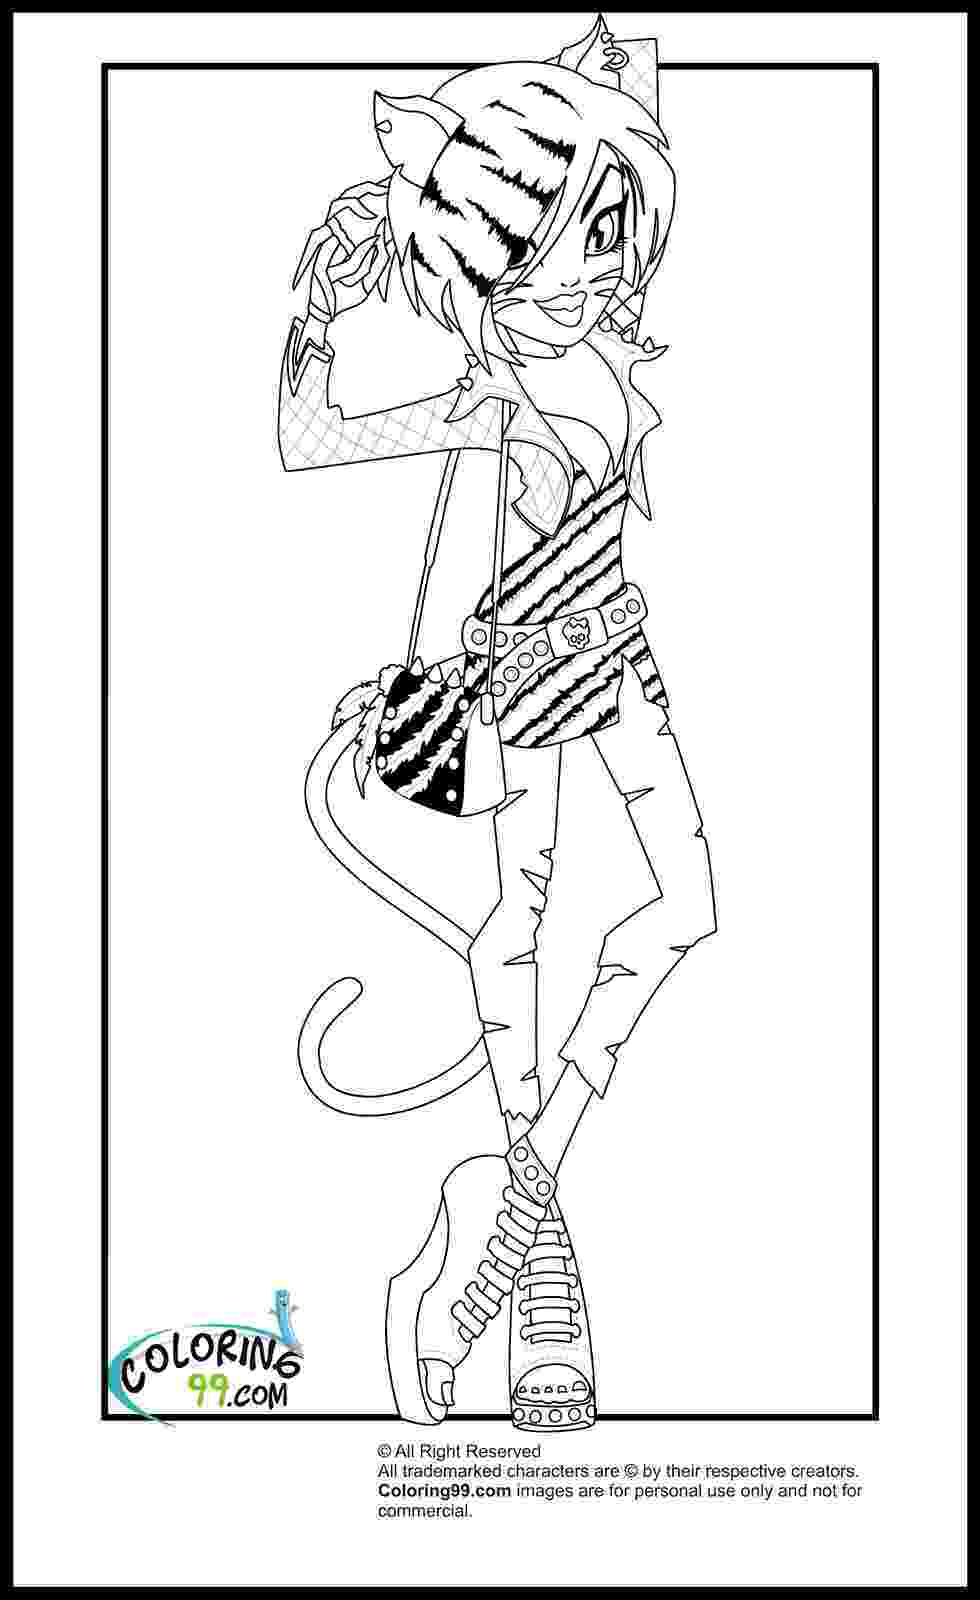 monsters high coloring pages monster high coloring pages team colors pages coloring high monsters 